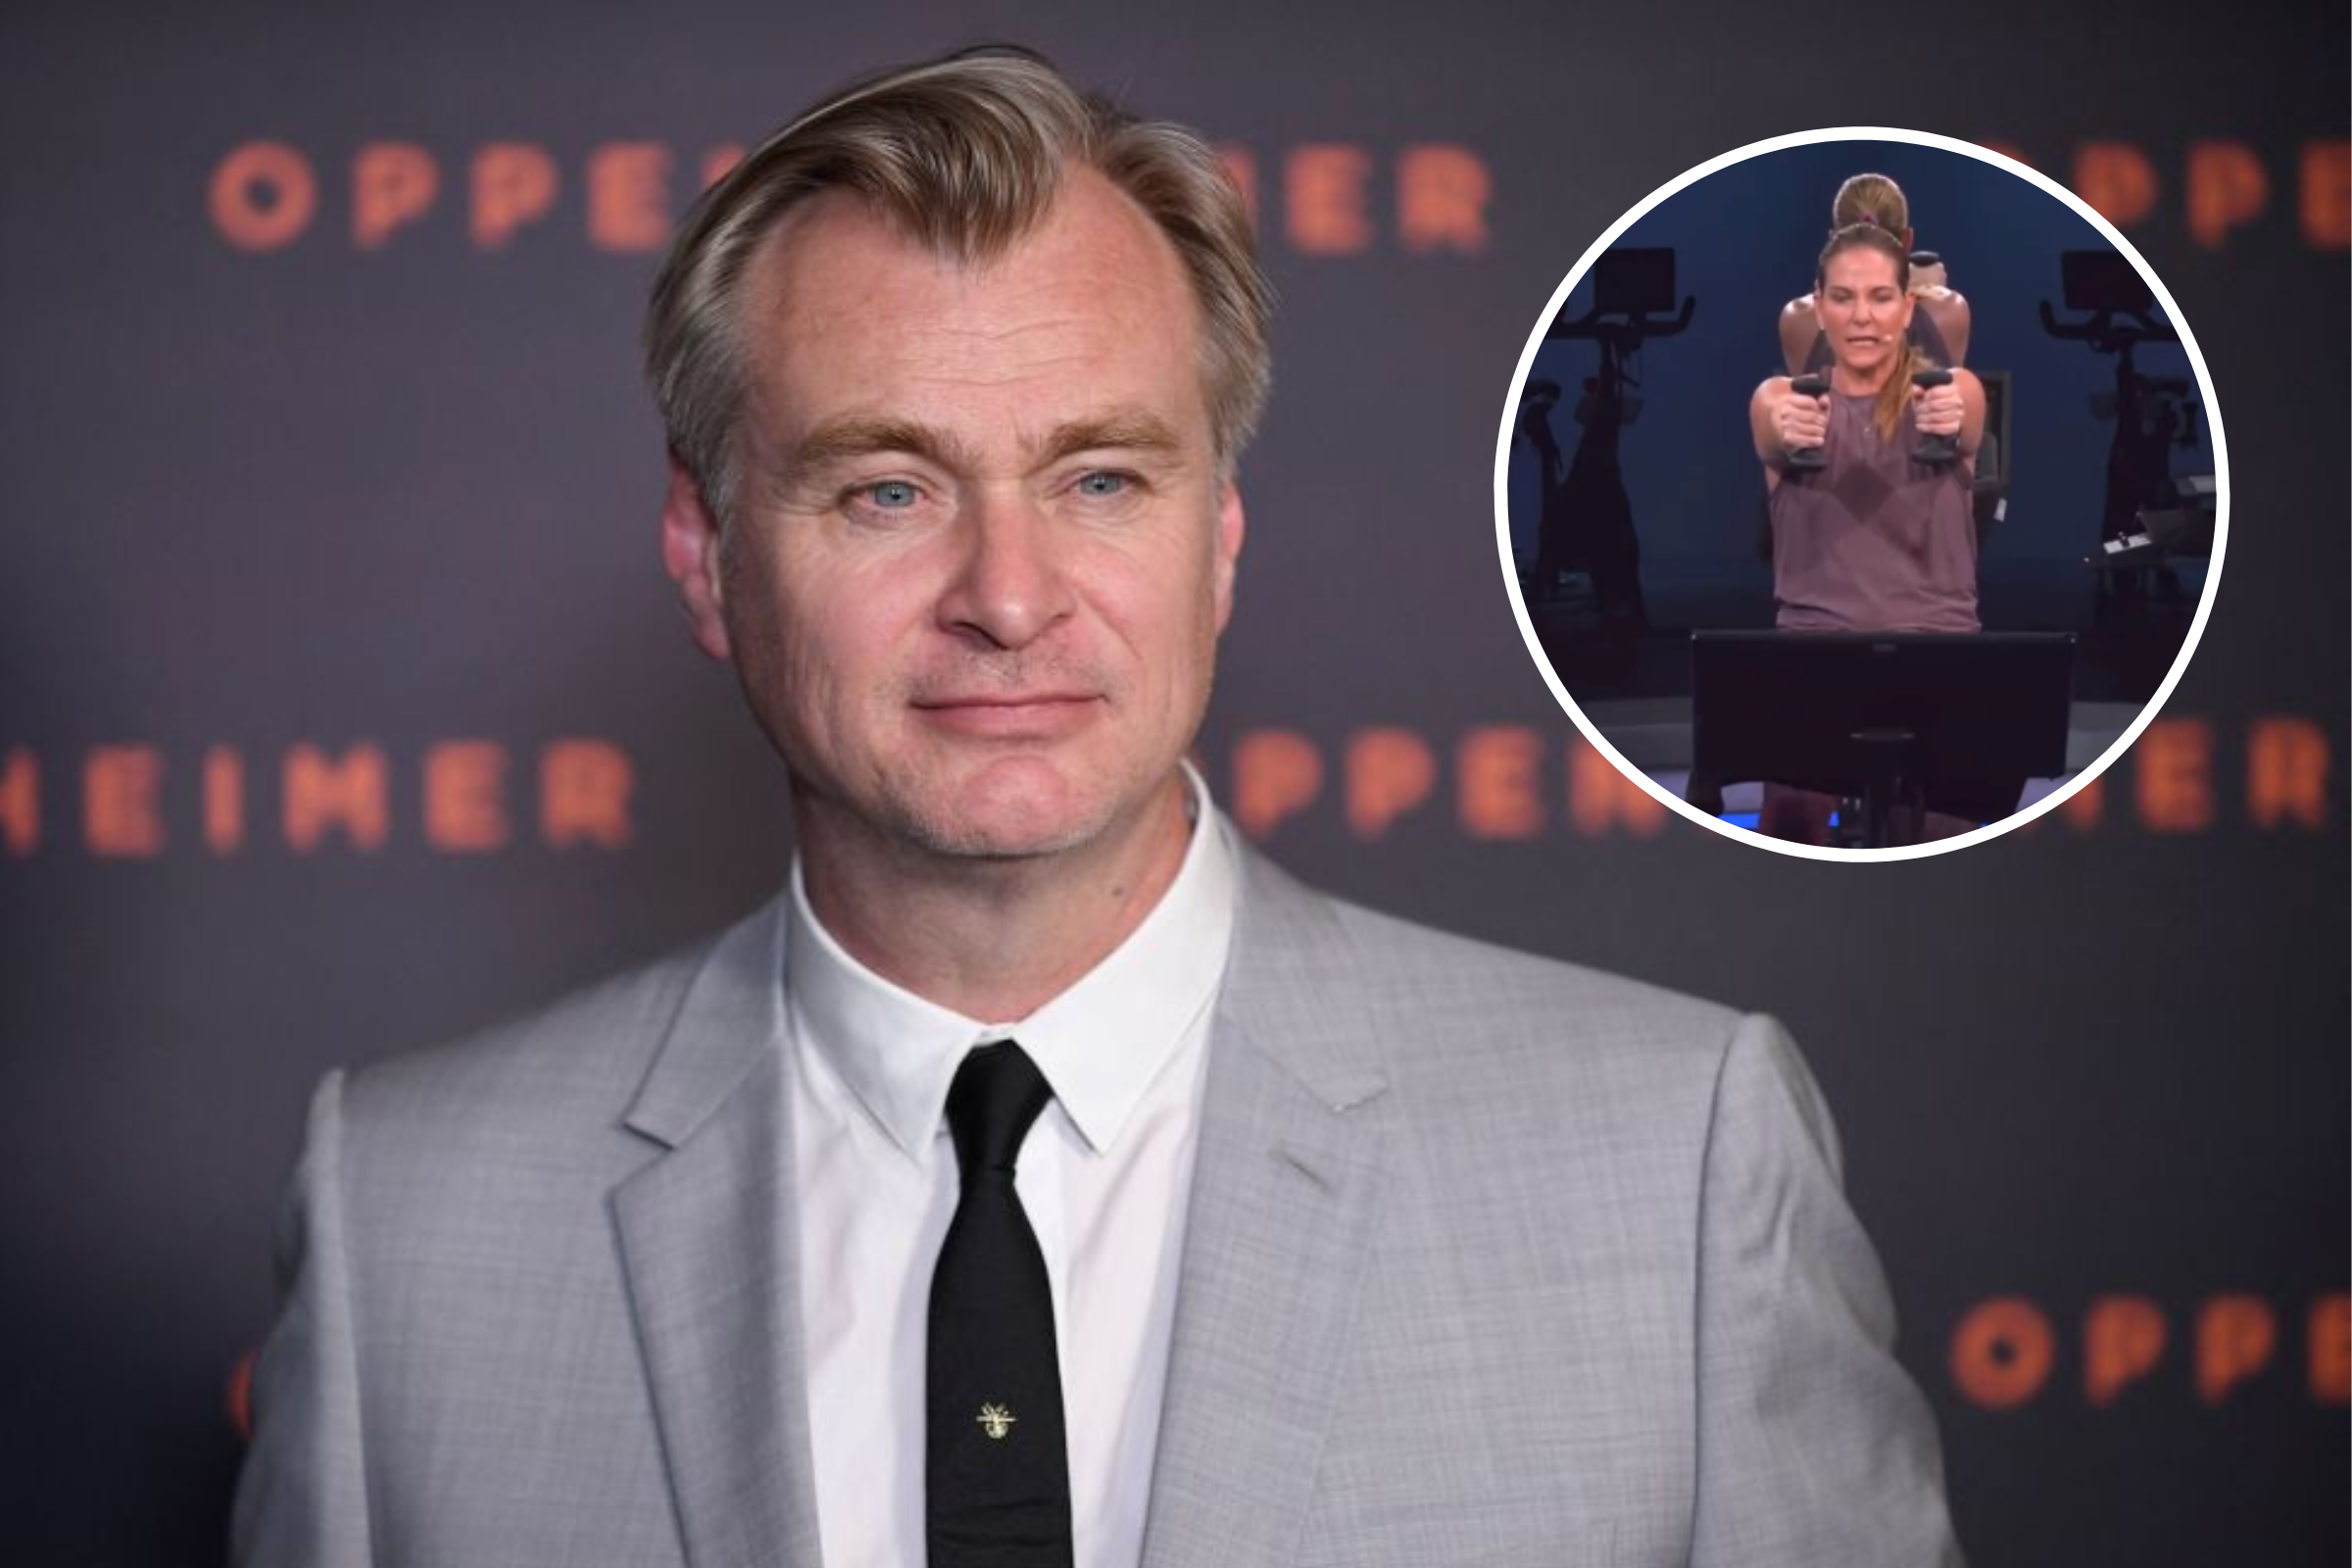 Christopher Nolan's Peloton Instructor Offers Apology After 'Tenet' Insult